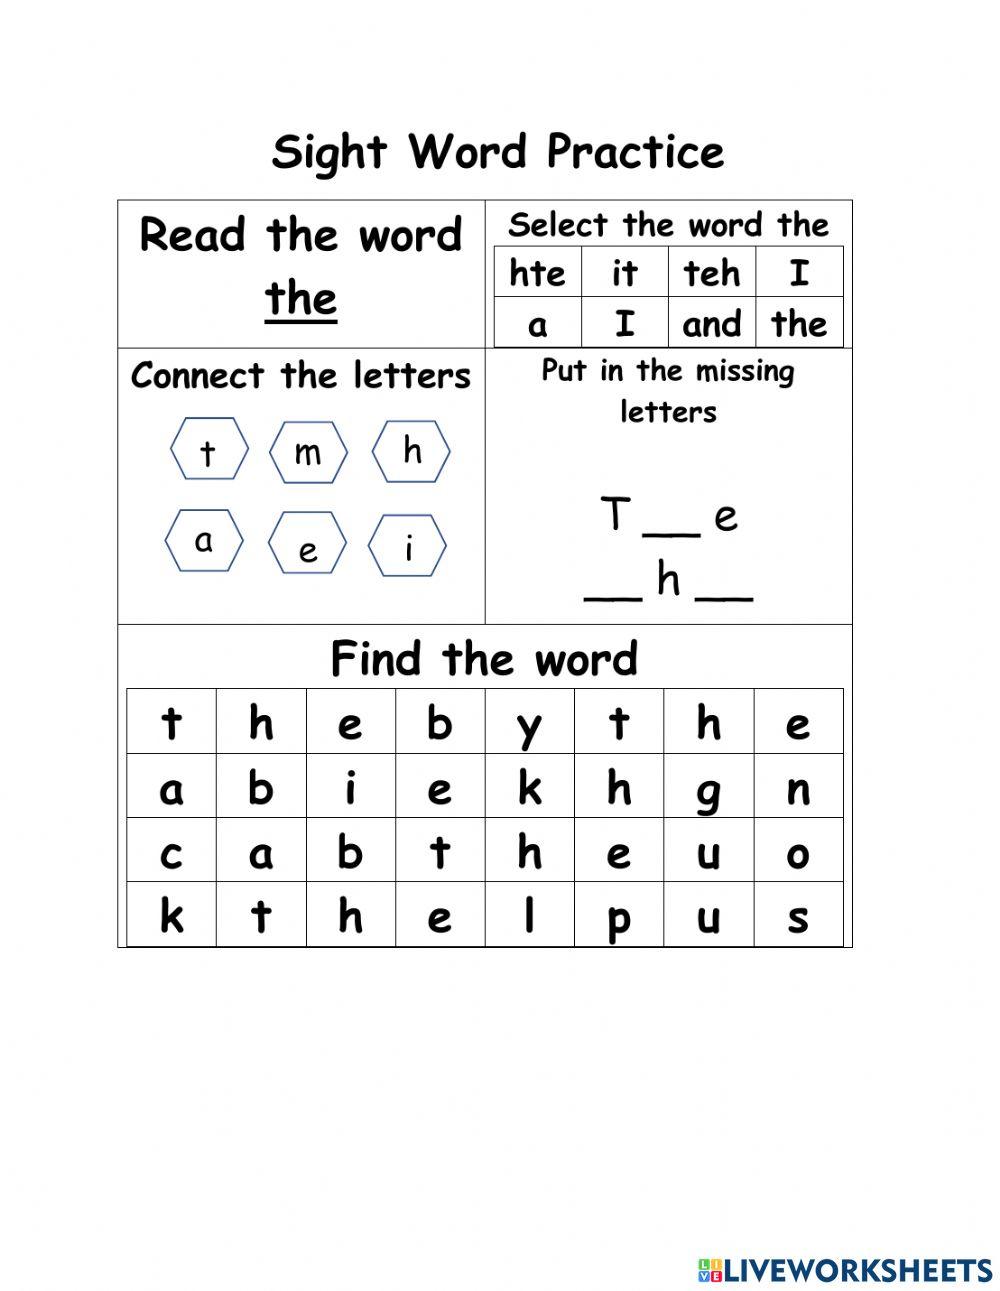 Sight word (the)